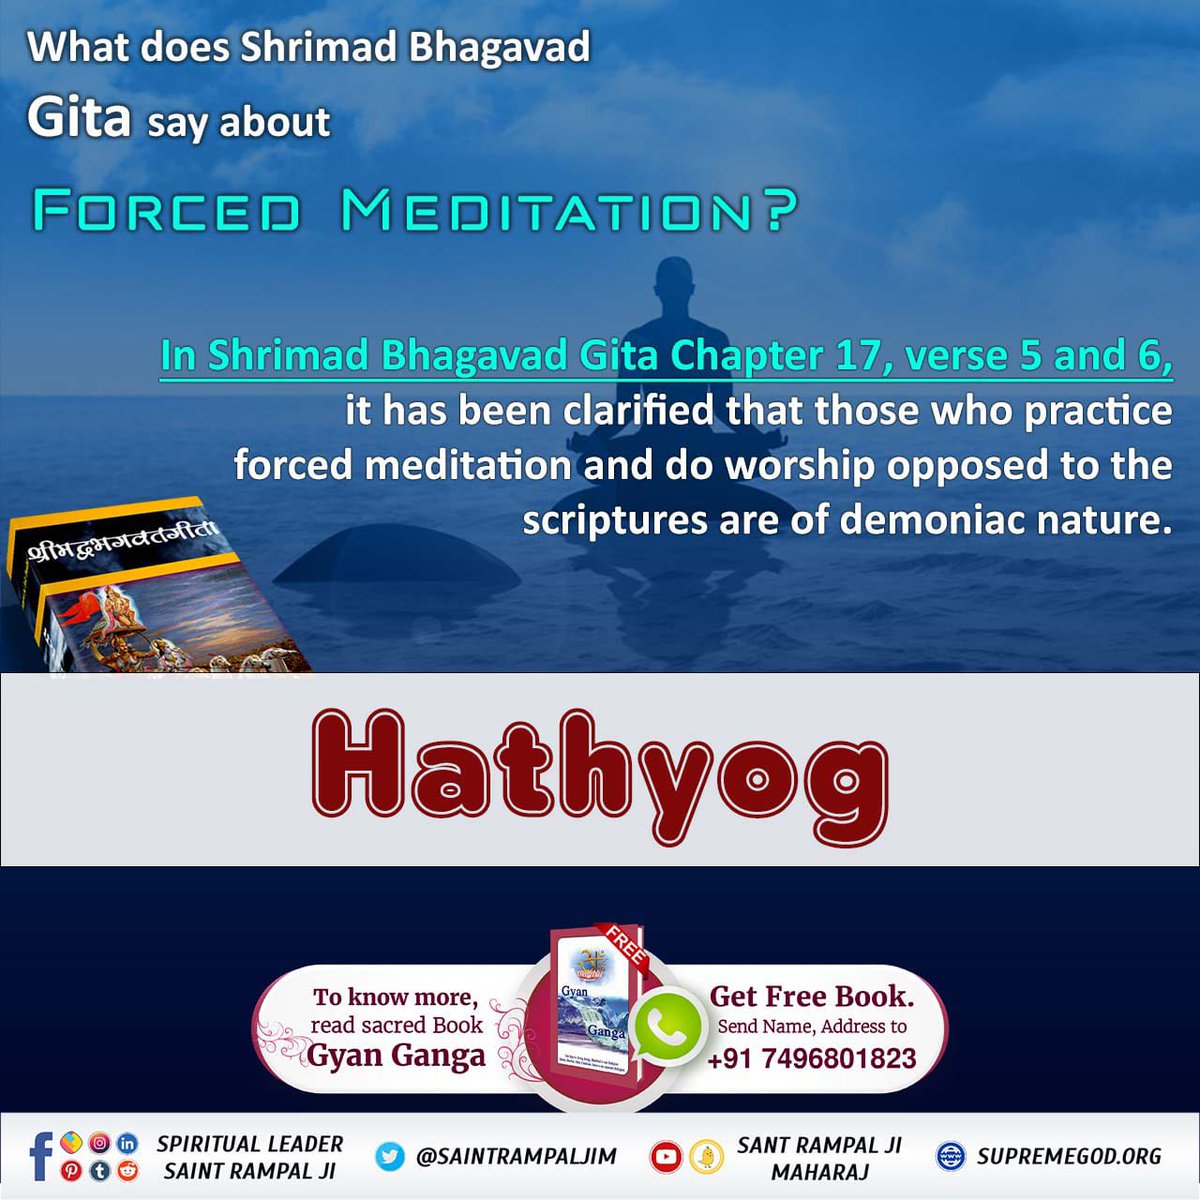 #What_Is_Meditation
'Embrace the journey of self-discovery with the wisdom of the Bhagavad Gita. Chapter 5, Verse 2 reminds us that true devotion springs from understanding, not just external rituals. Let's seek inner transformation rather than external renunciation.